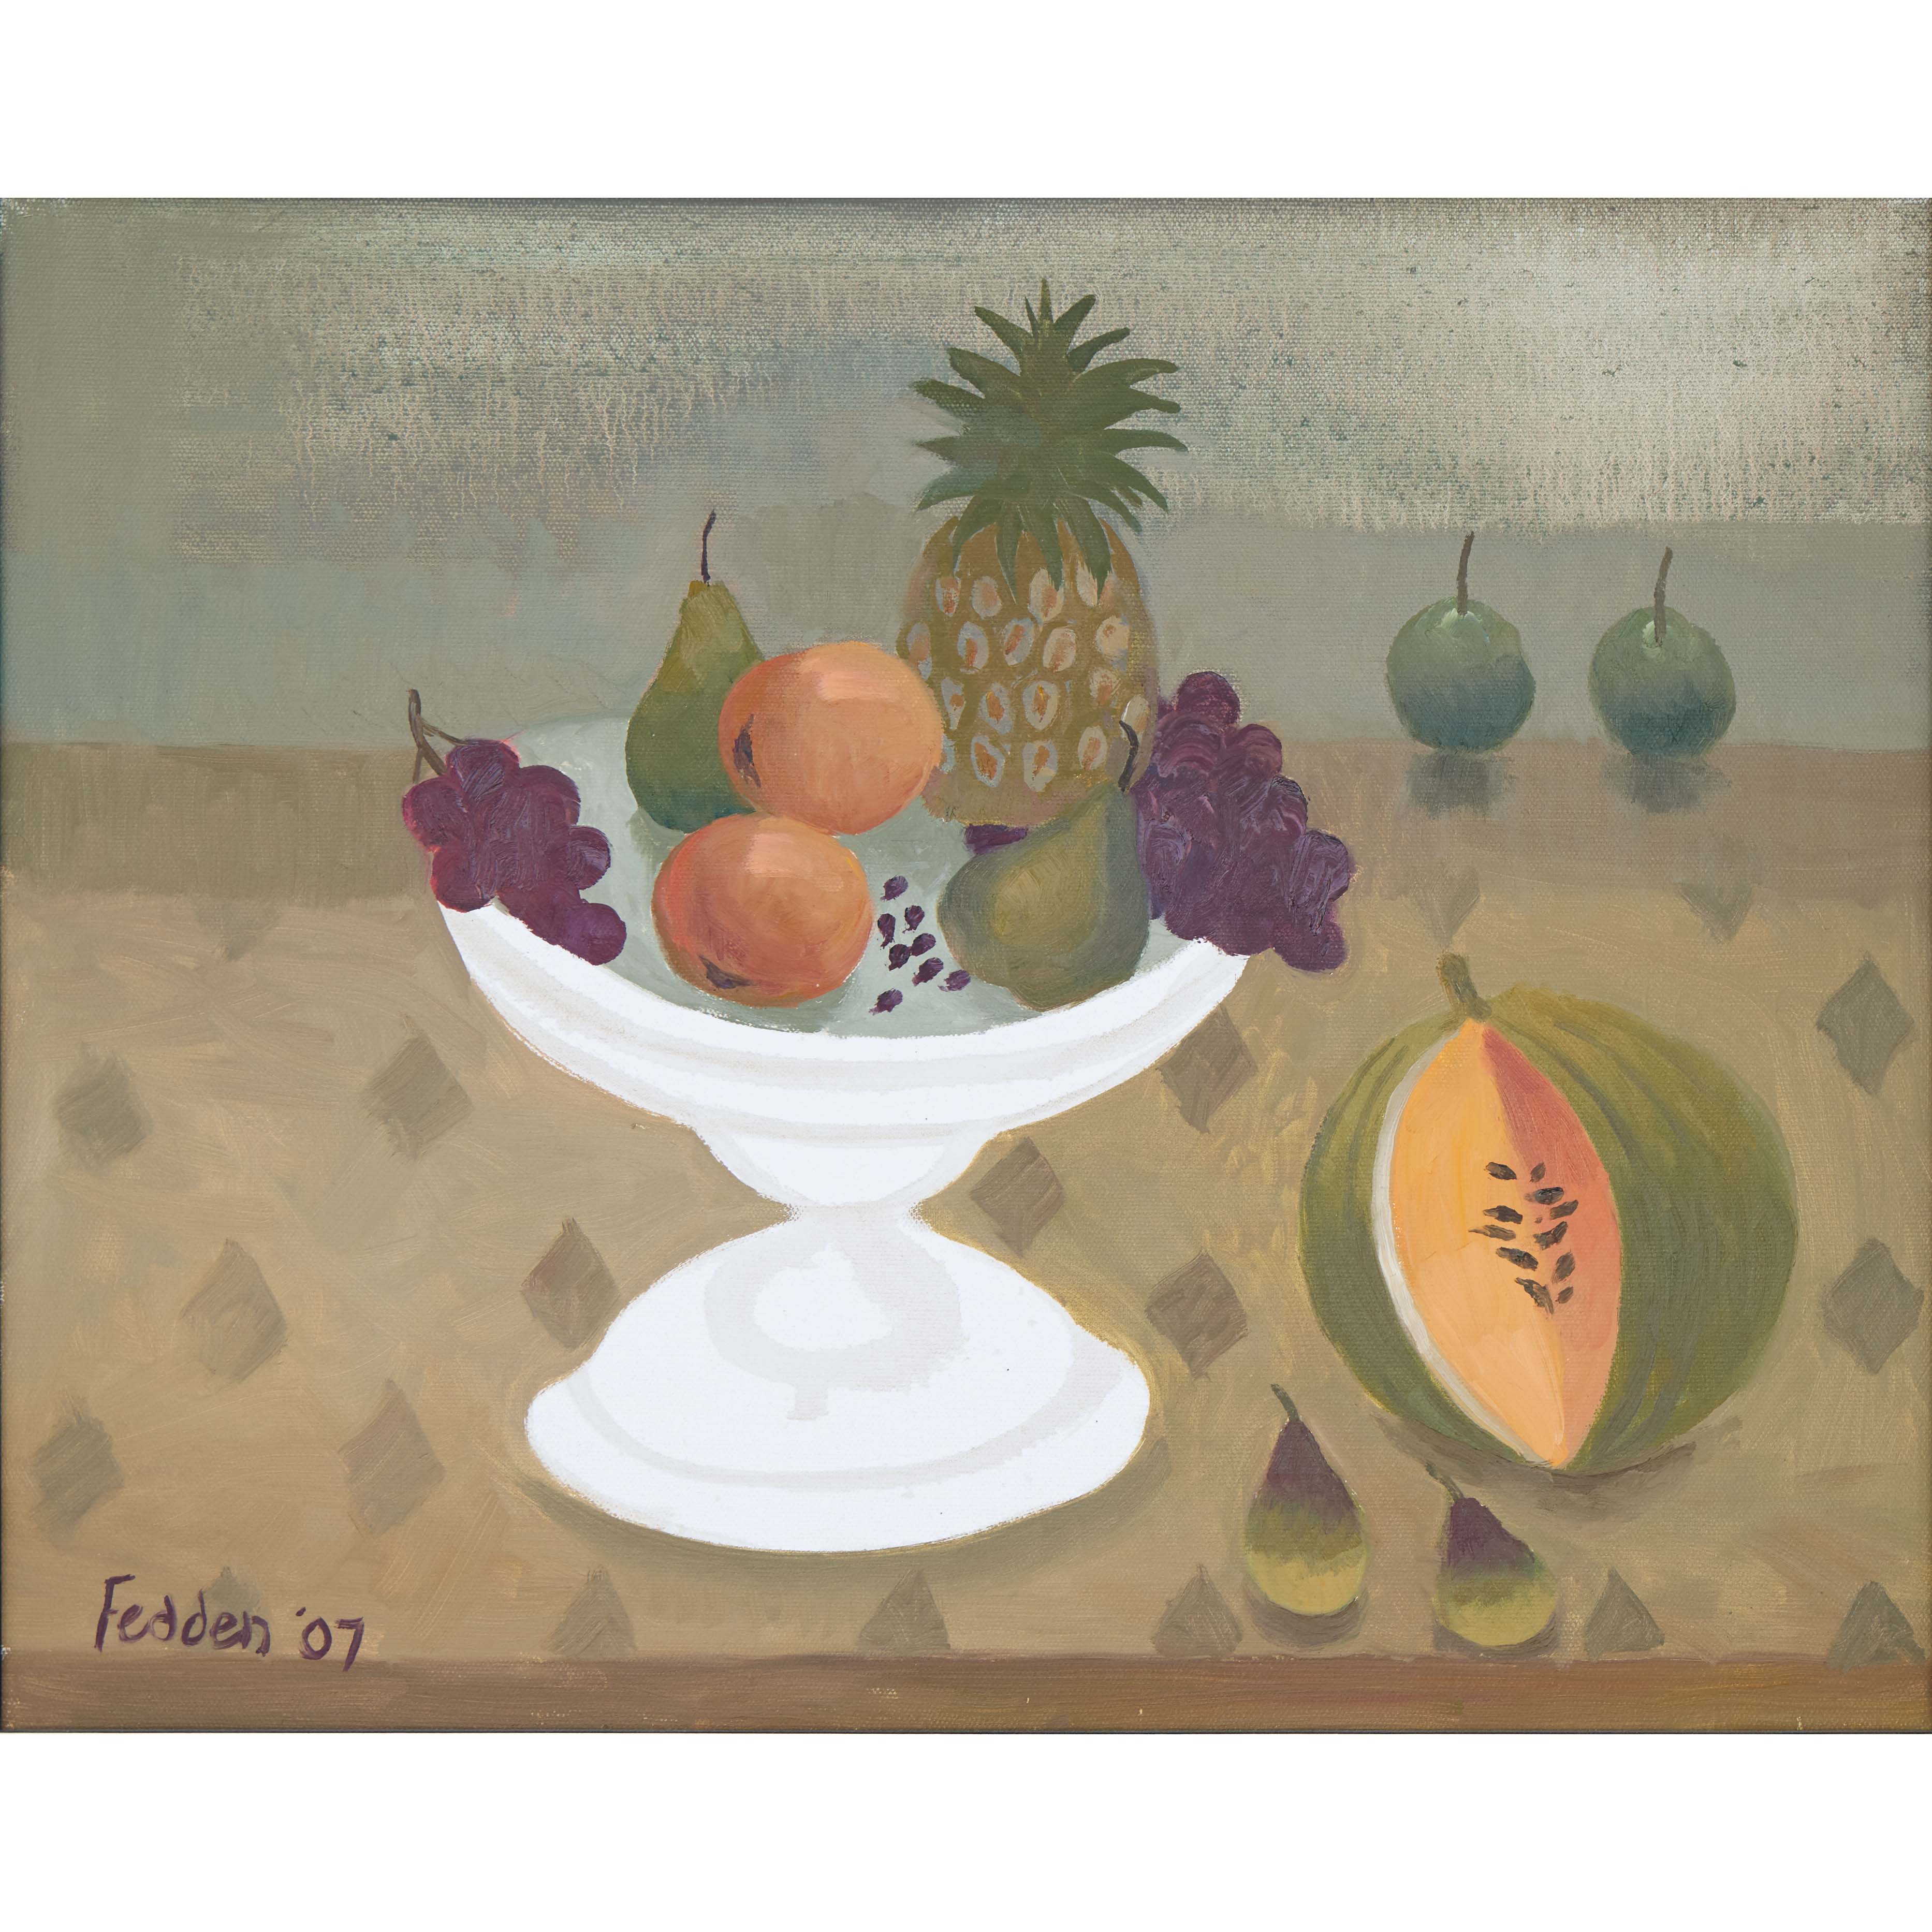 MARY FEDDEN. THE WHITE DISH. 2007